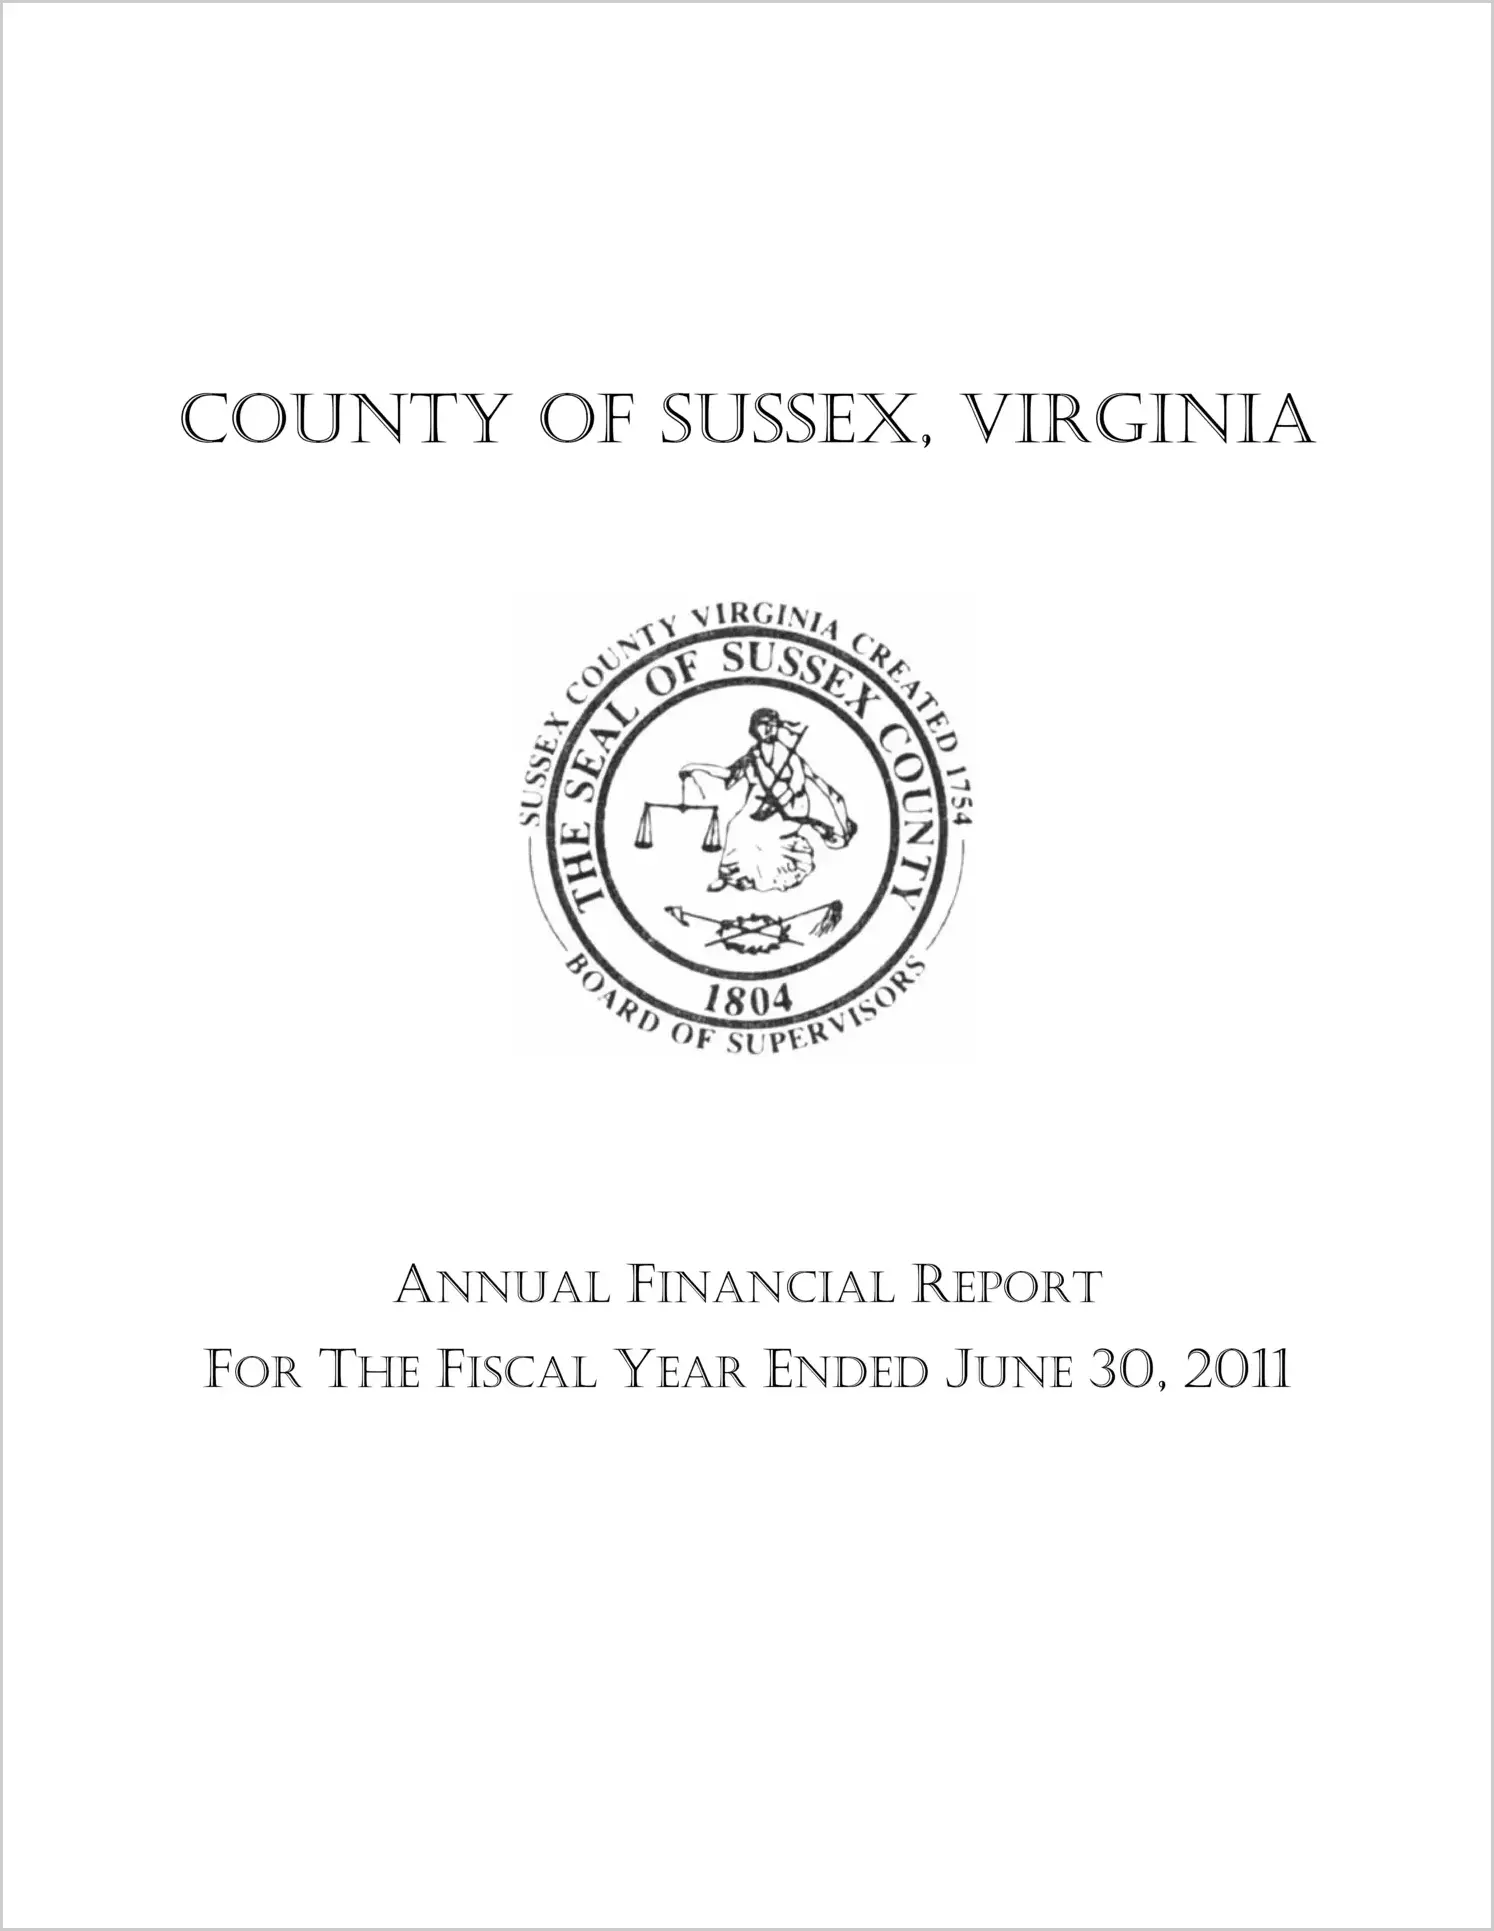 2011 Annual Financial Report for County of Sussex